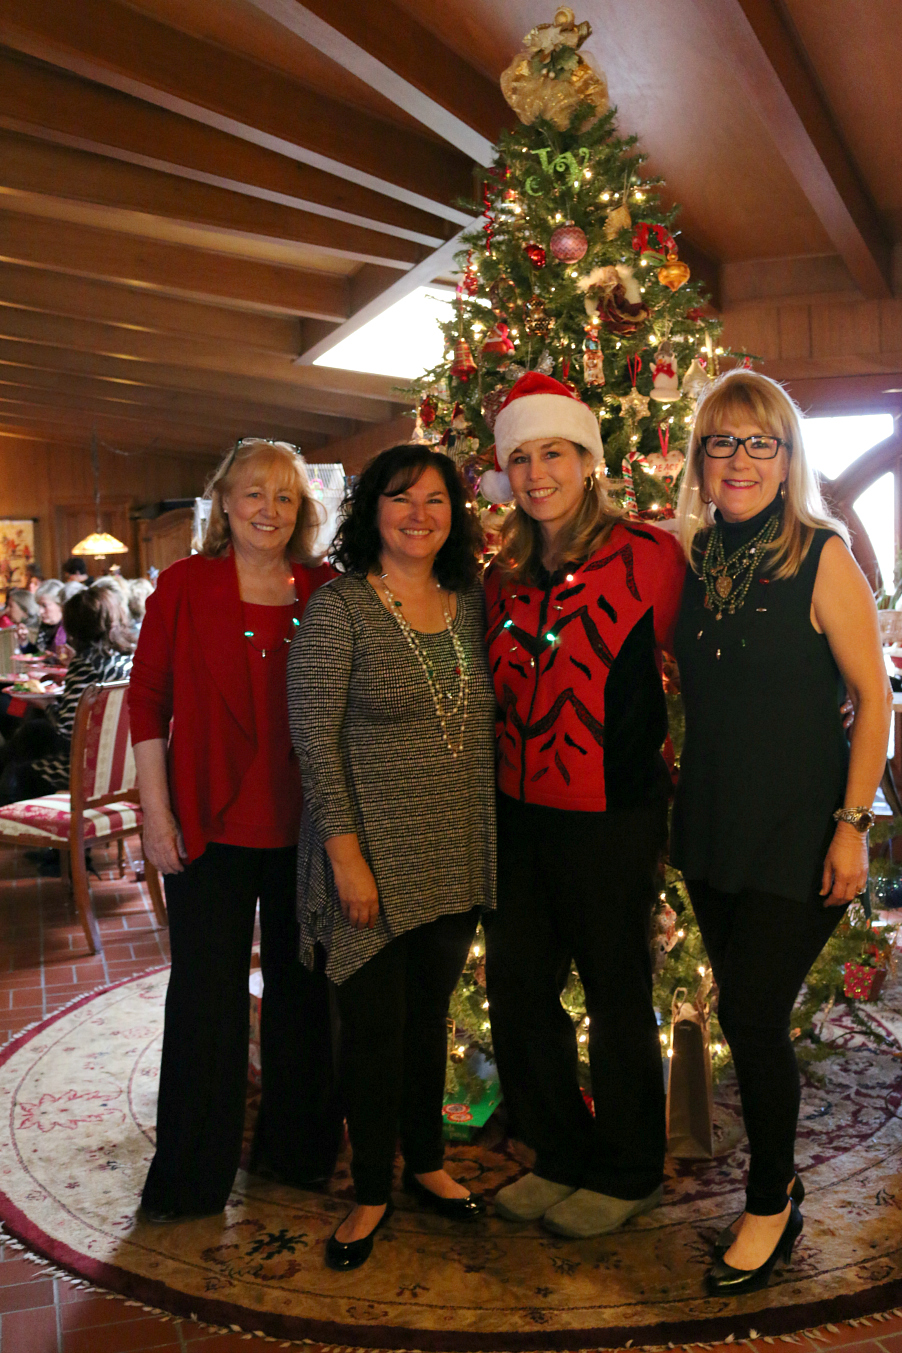 The hostesses! I started the ornament exchange about 20 years ago. EEK! My how time flies when you're having fun. 